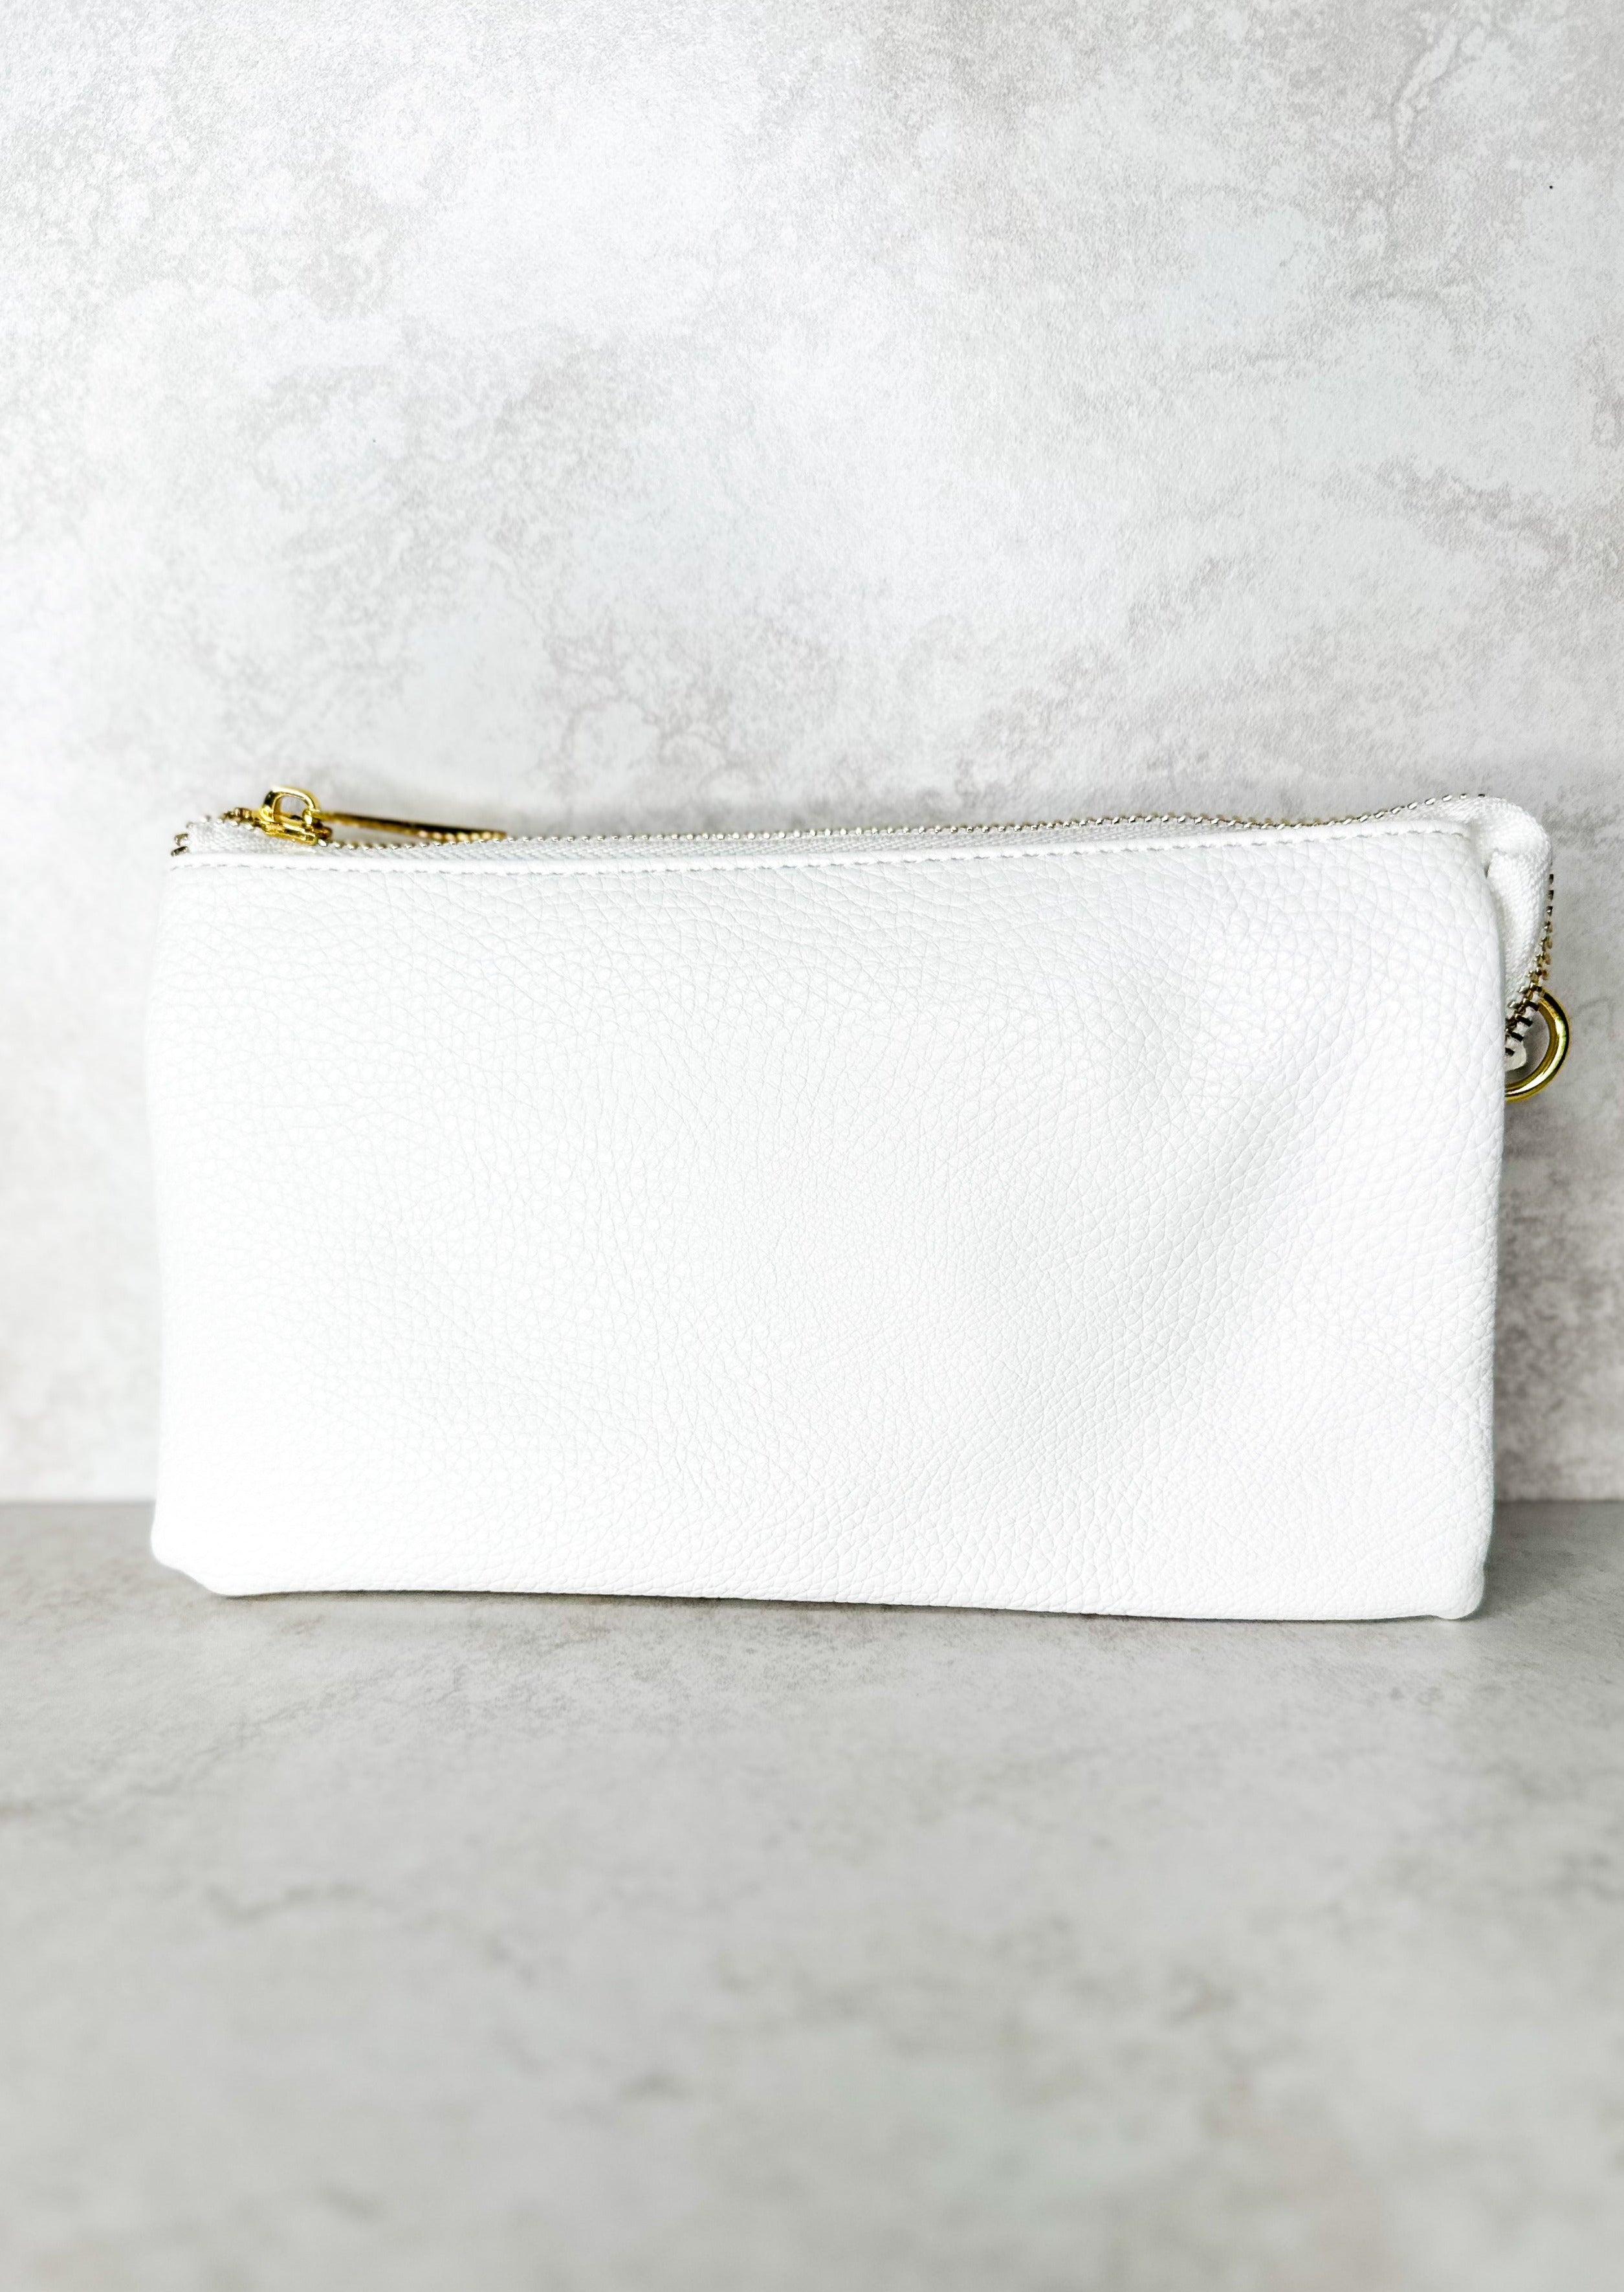 Crossbody bag with zipper, gold hardware, pockets inside, comes with wrist strap and shoulder strap, both straps removable - white